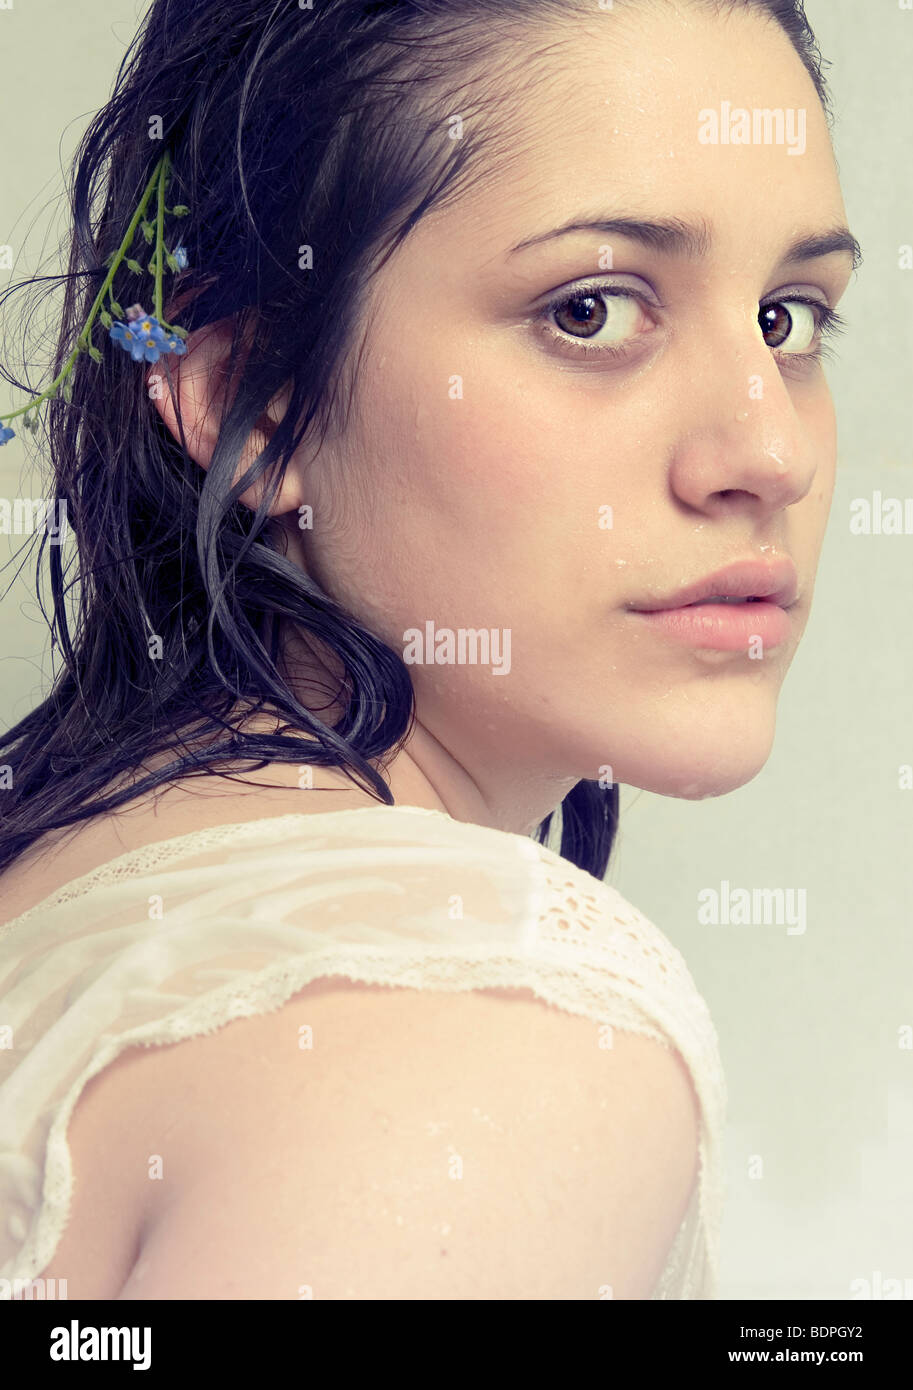 A young girl with dark wet hair looking at the camera Stock Photo